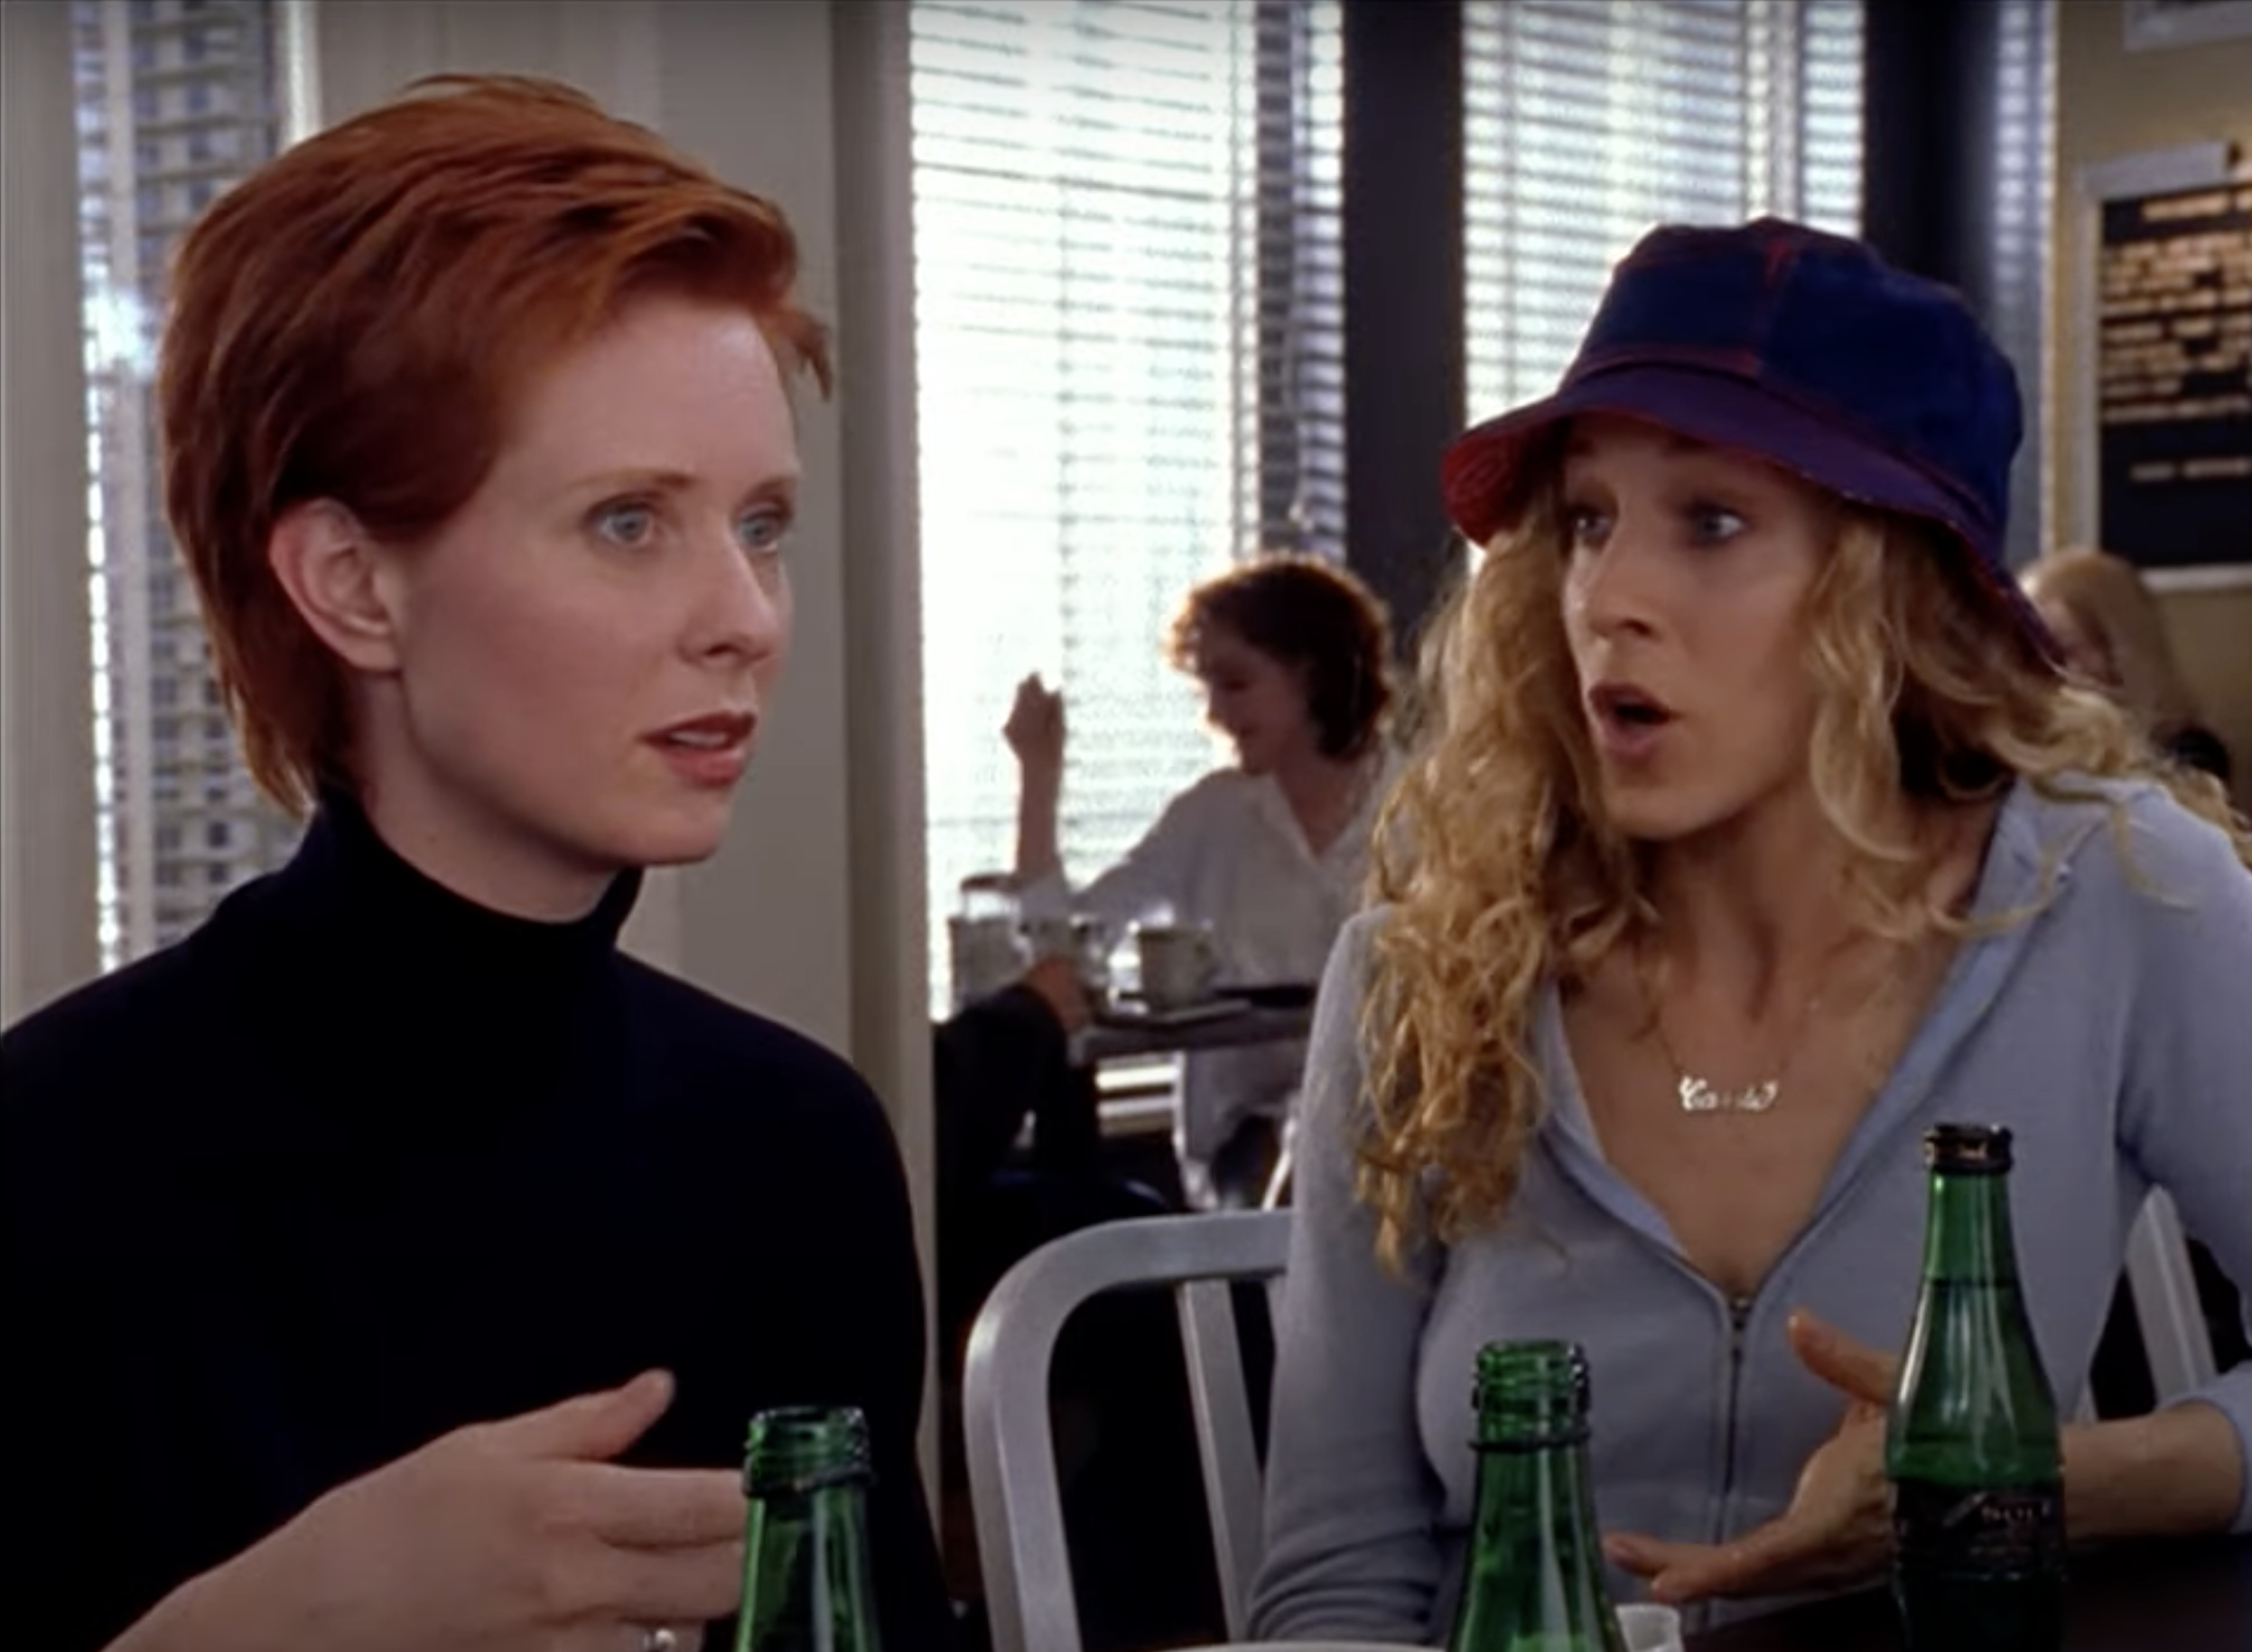 Cynthia Nixon and Sarah Jessica Parker are seated at a restaurant table, engaged in an animated conversation with bottles of sparkling water in front of them